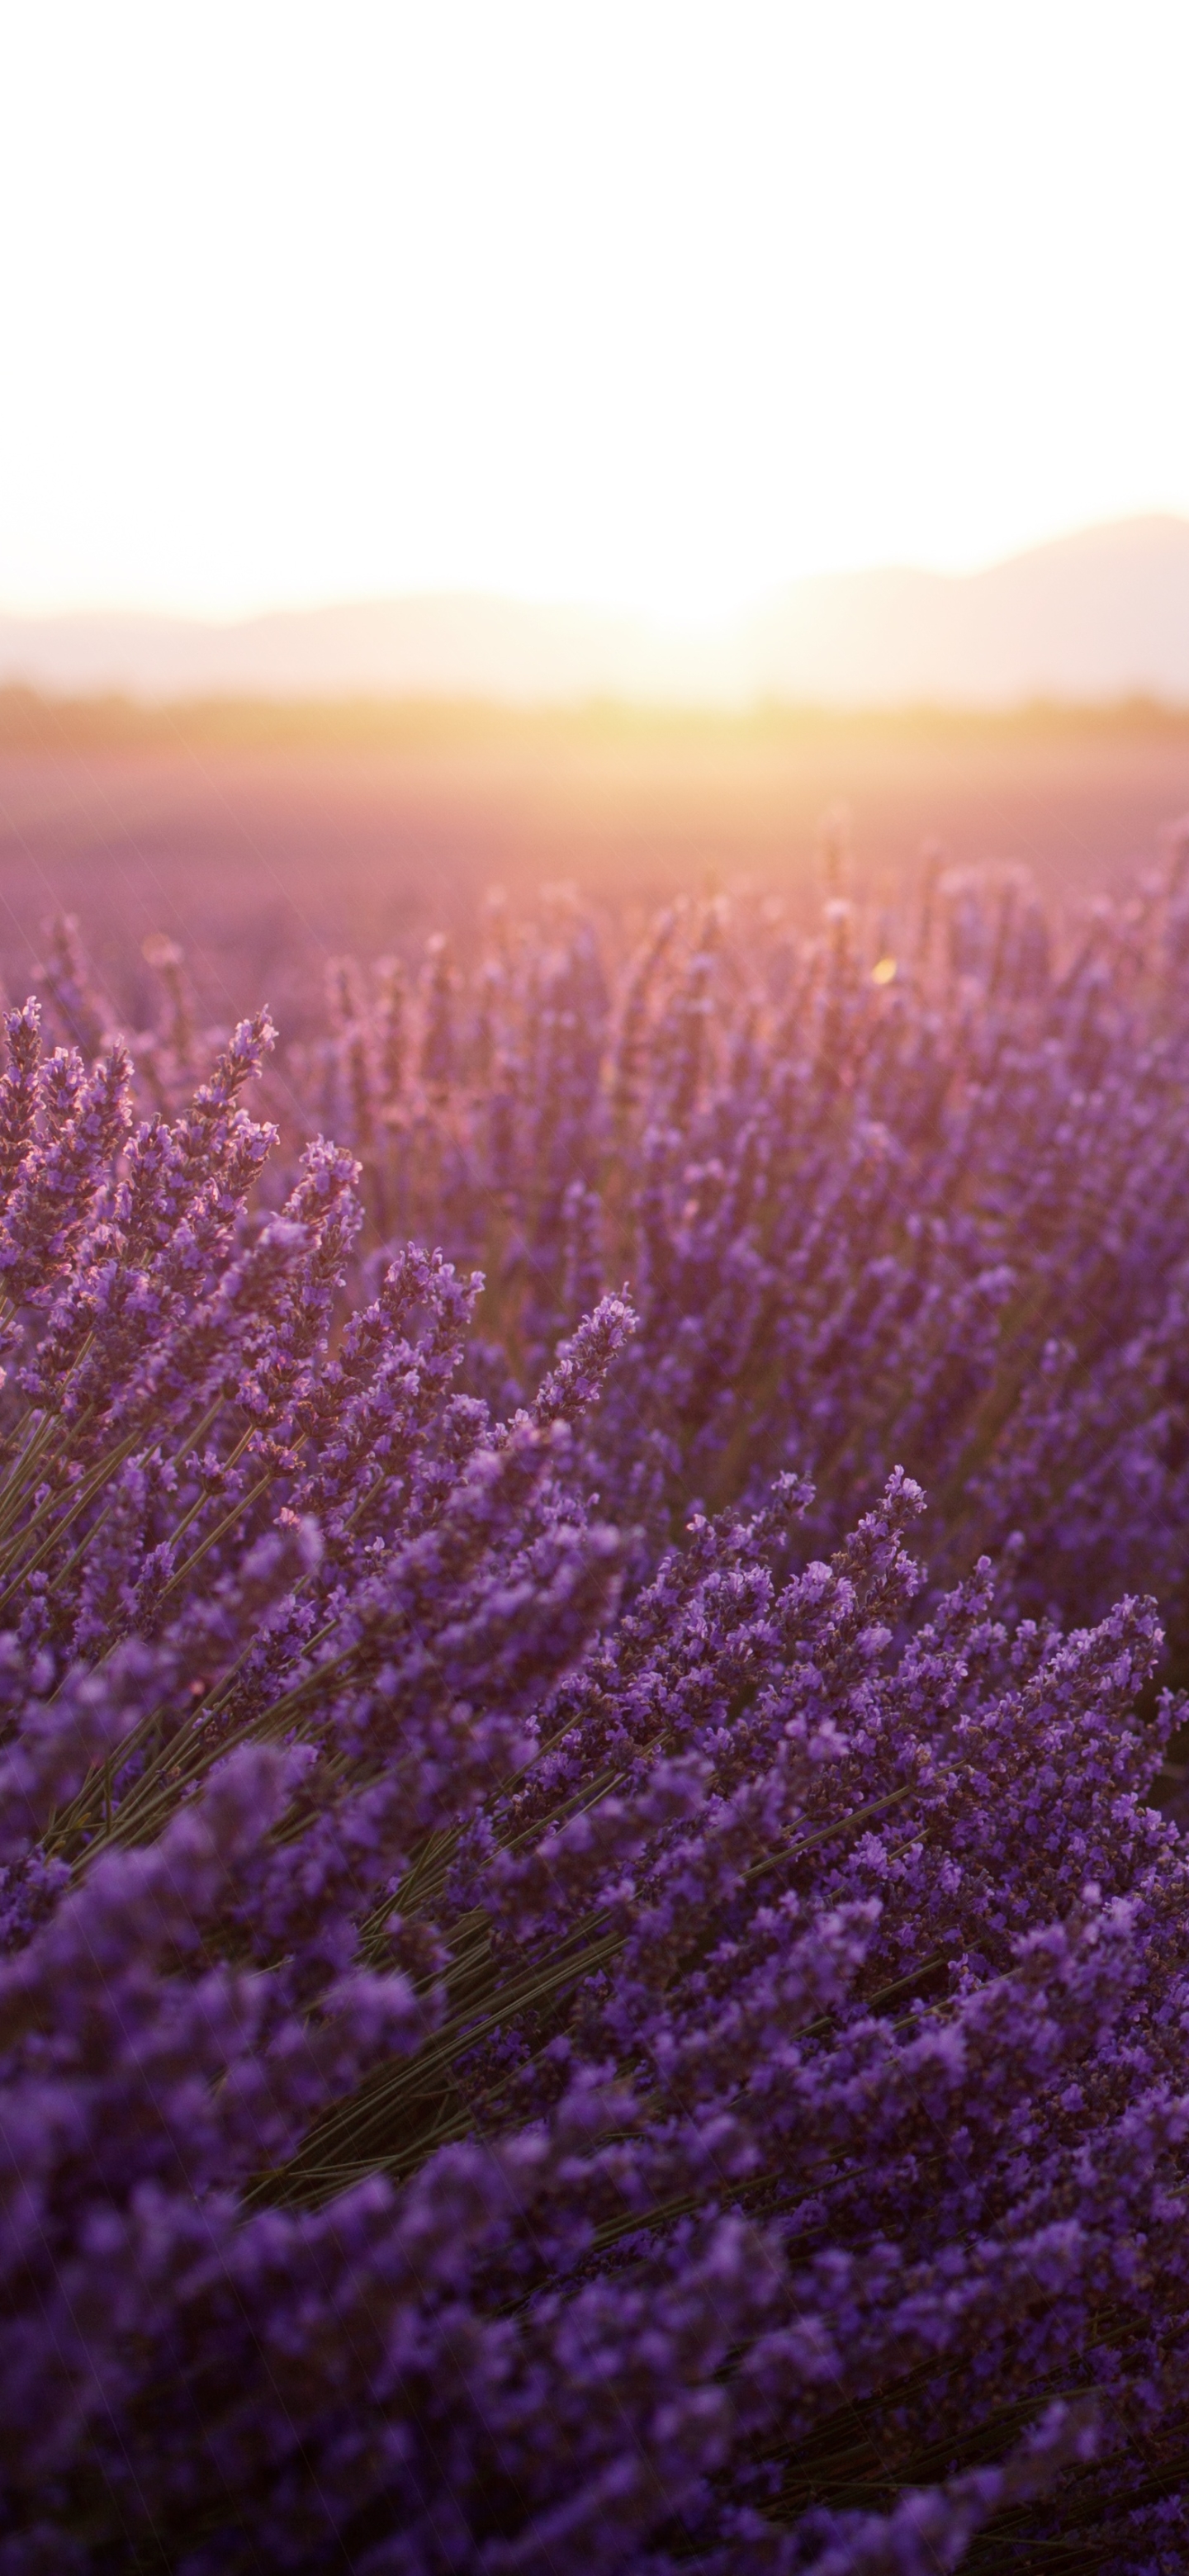 Mobile wallpaper: Landscape, Nature, Flowers, Sunset, Summer, Flower, Earth, Field, Lavender, Depth Of Field, 1165771 download the picture for free